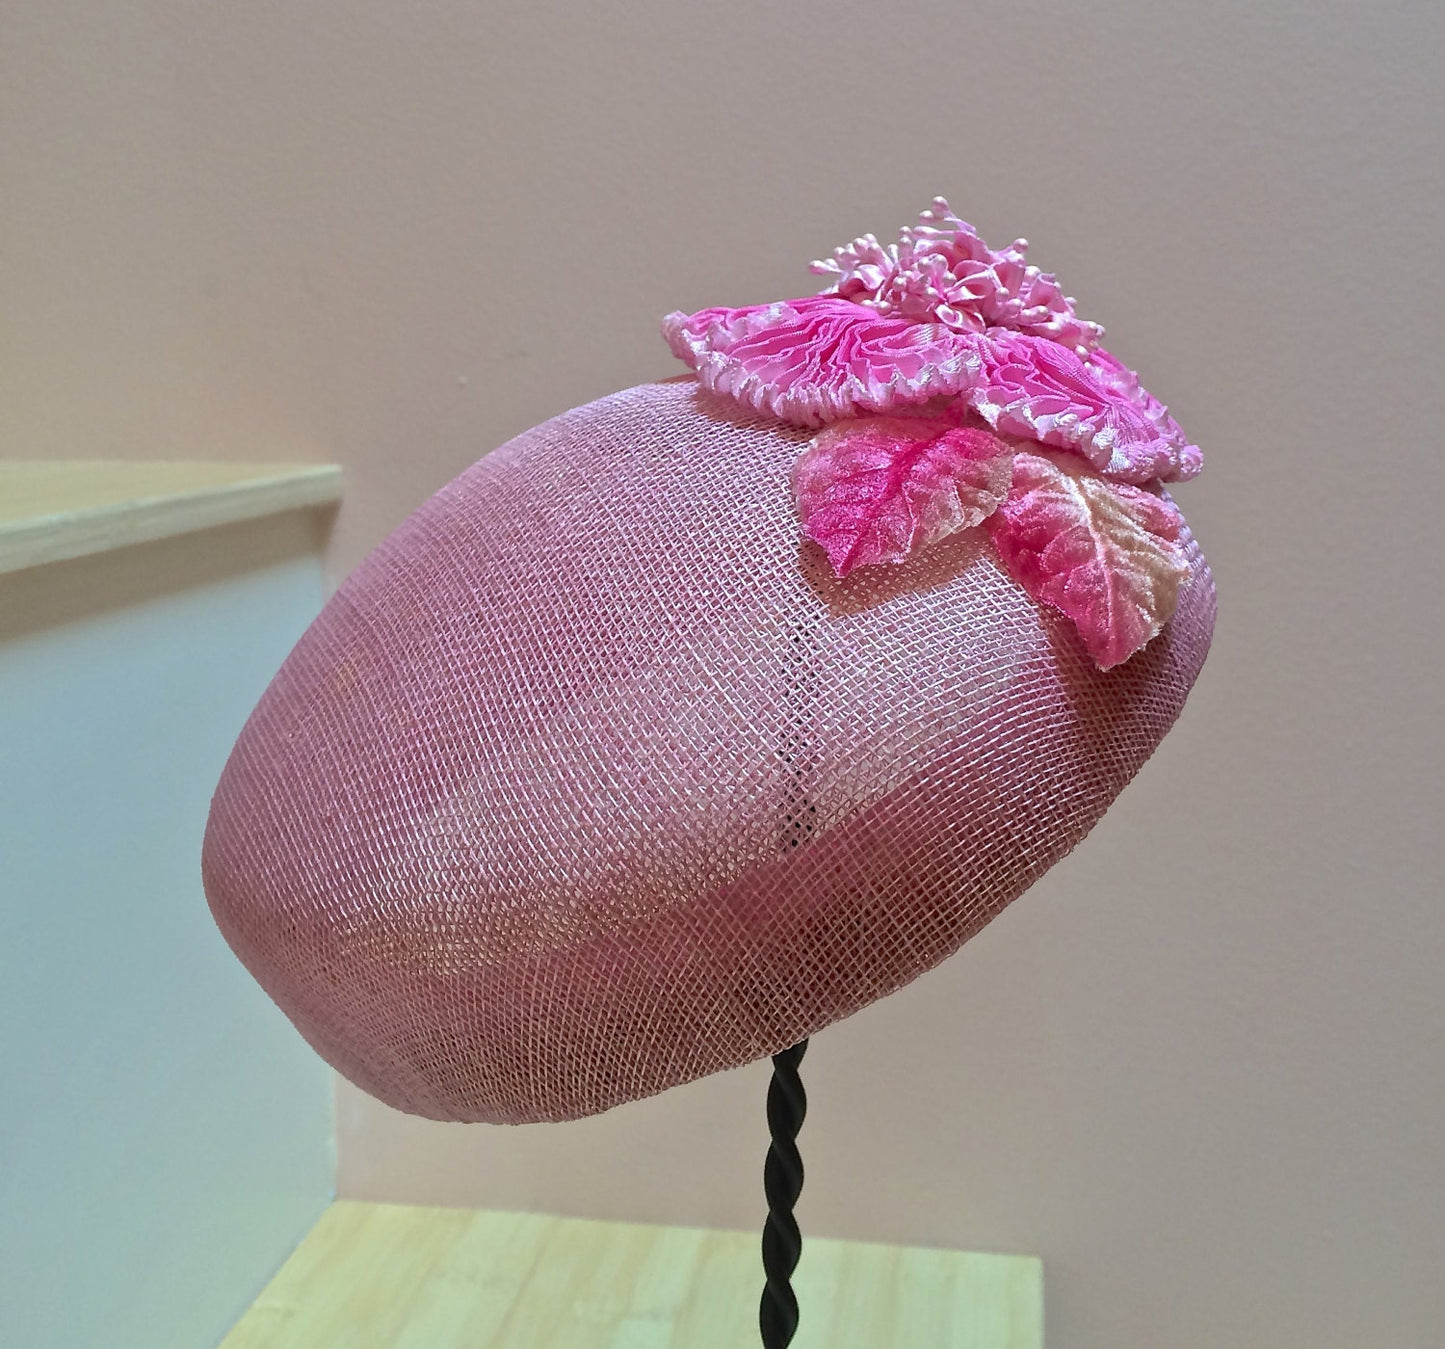 Pink Sinamay Pill Box Hat, Wedding hat, Mother of the Bride hat, Girls hat. Garden party or Church hat. Pink Straw Pill Box Hat with floral